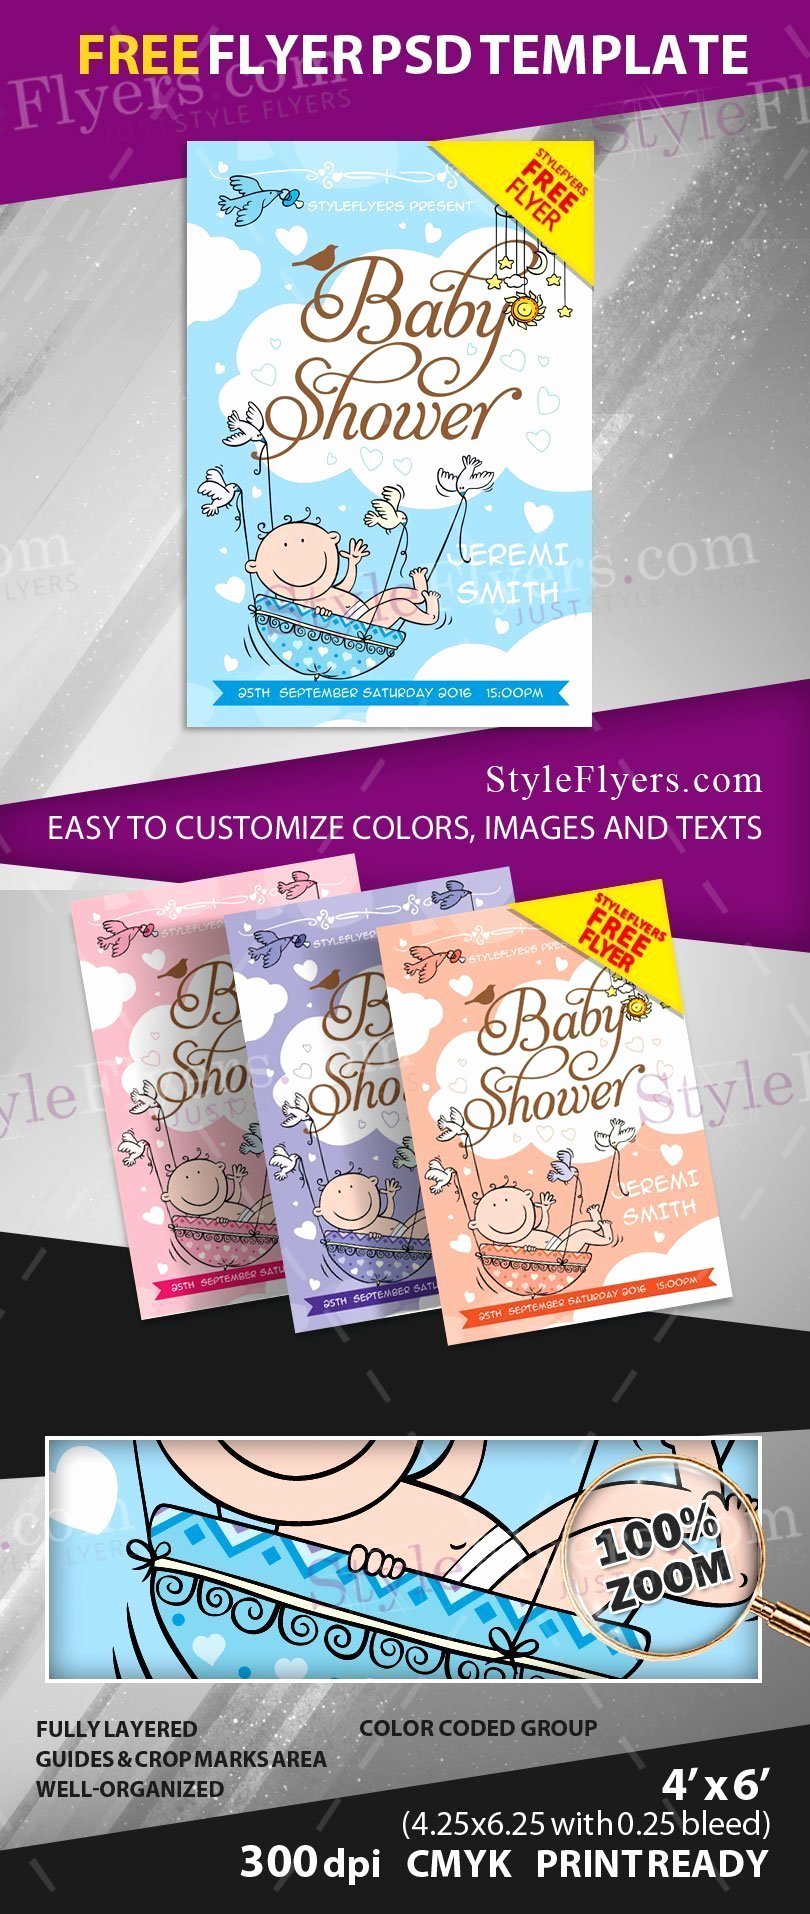 baby shower flyer free psd flyer template